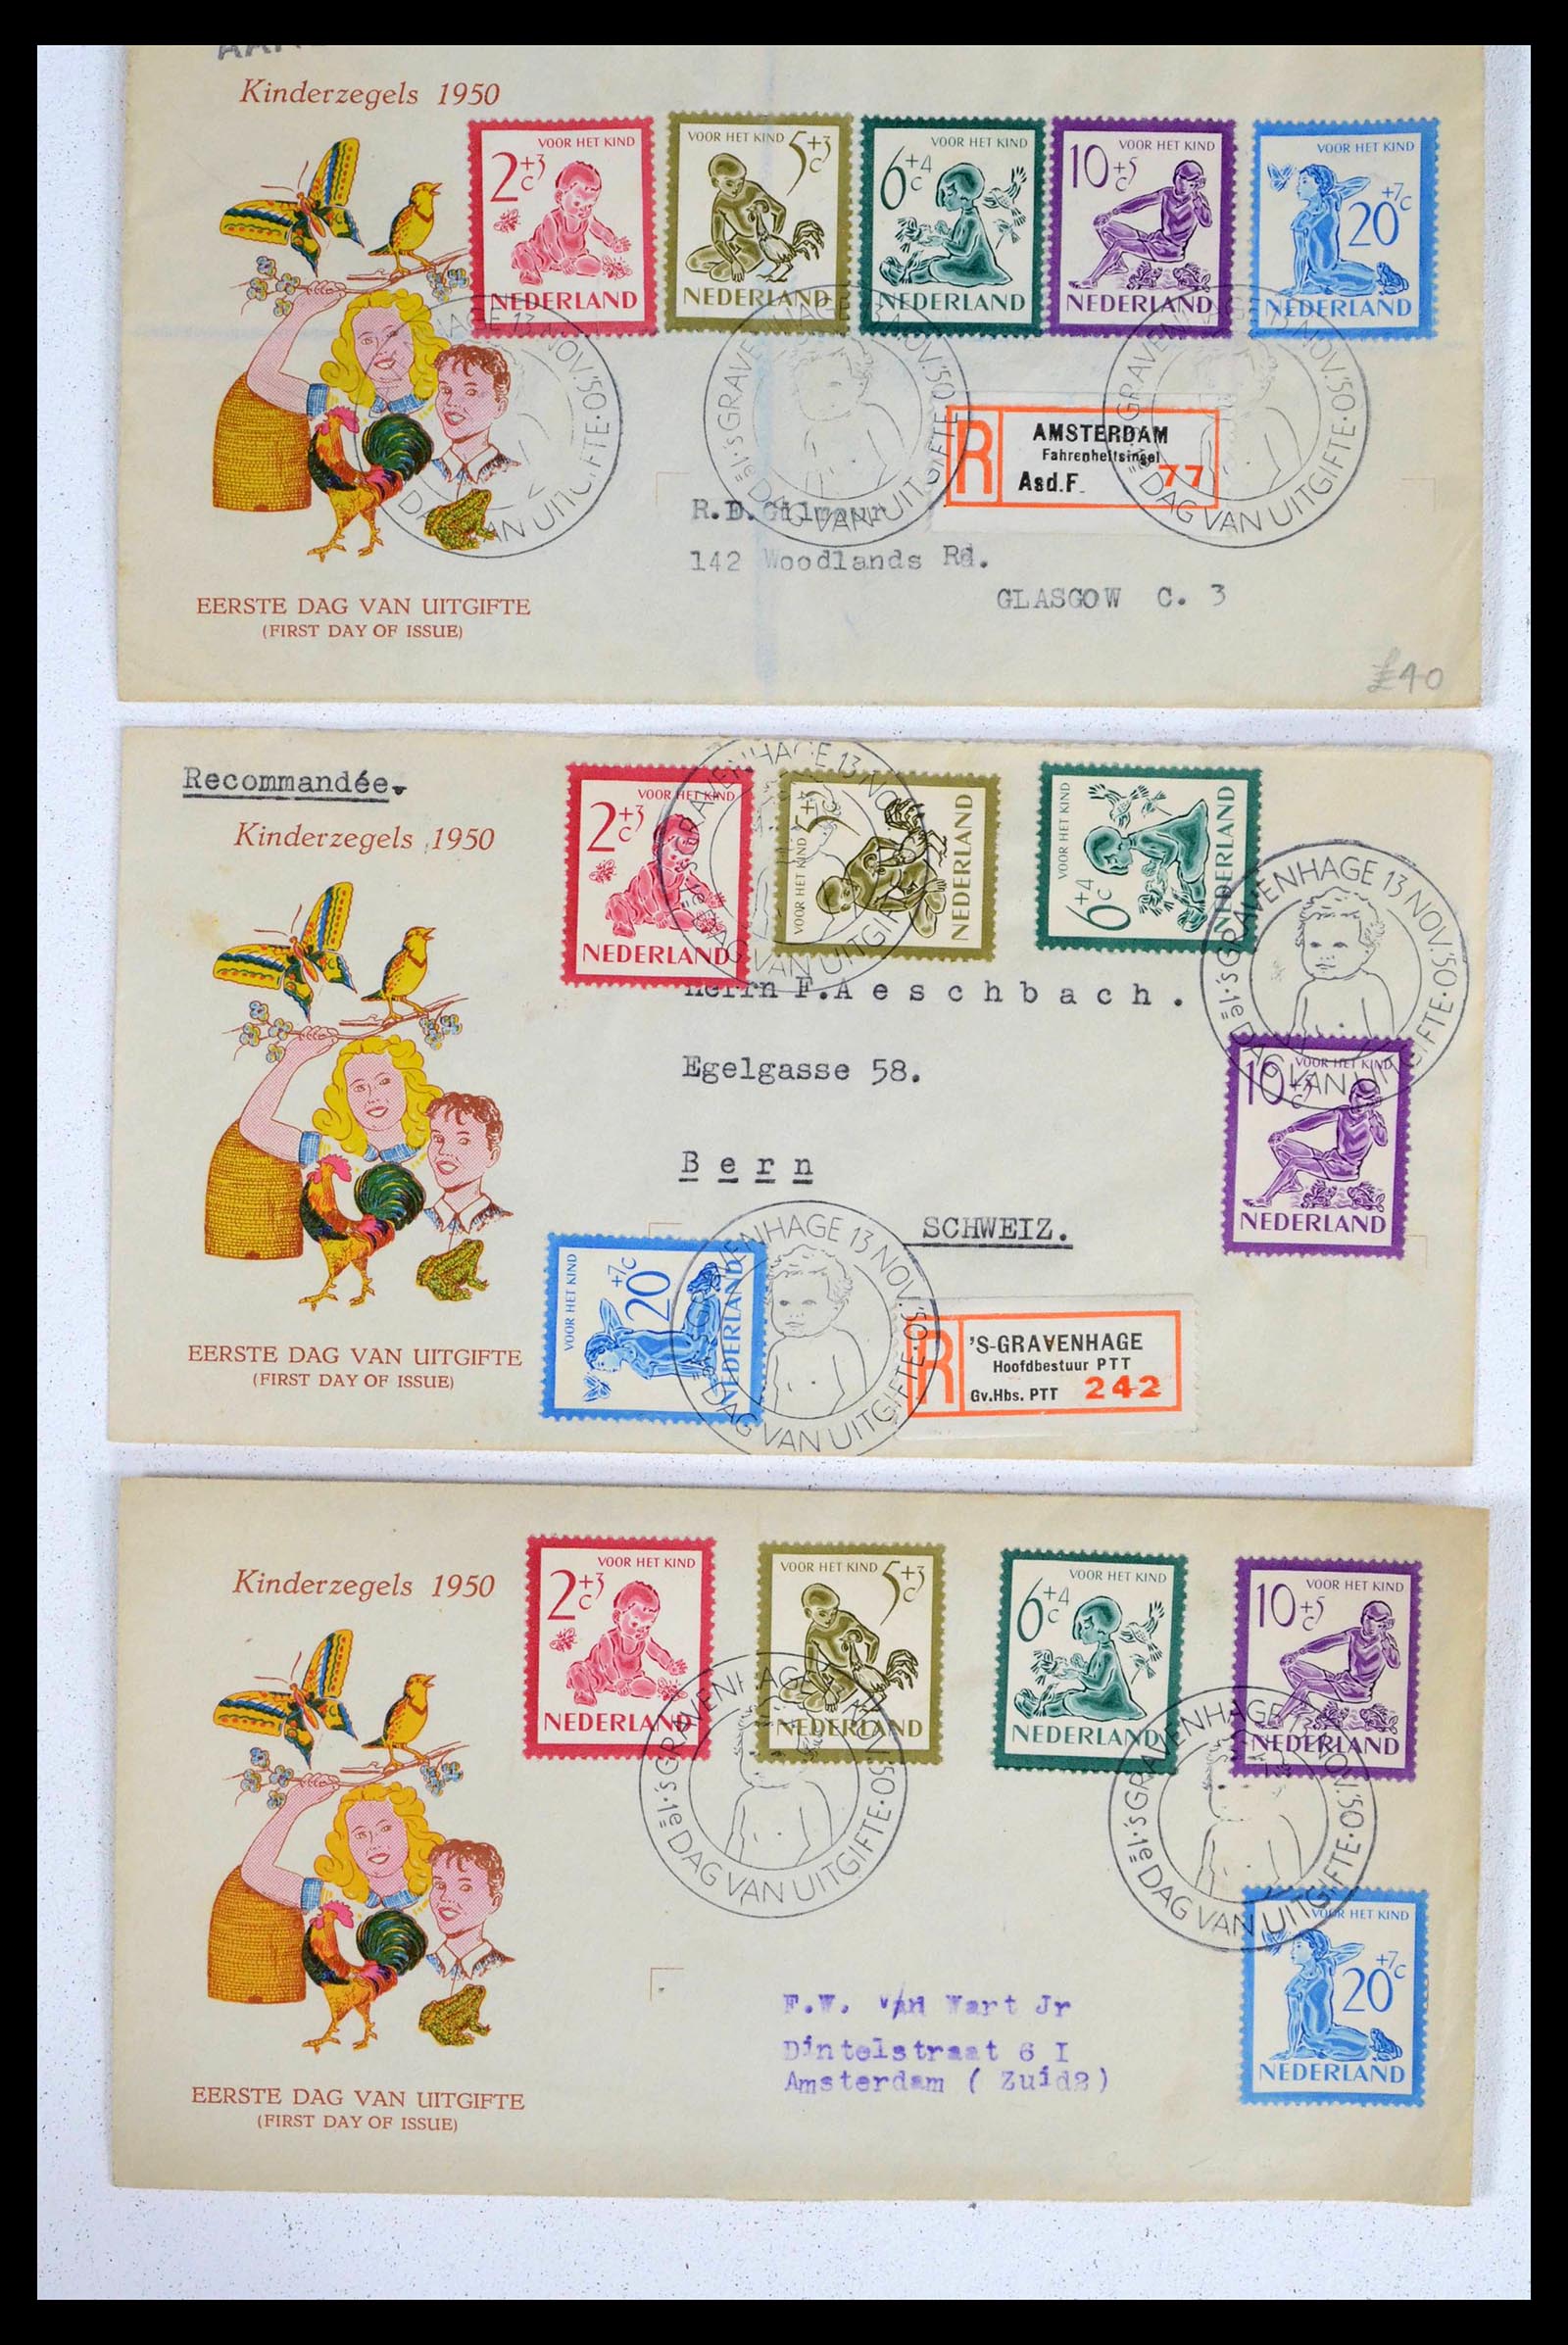 39474 0002 - Stamp collection 39474 Netherlands FDC's 1950-1960.